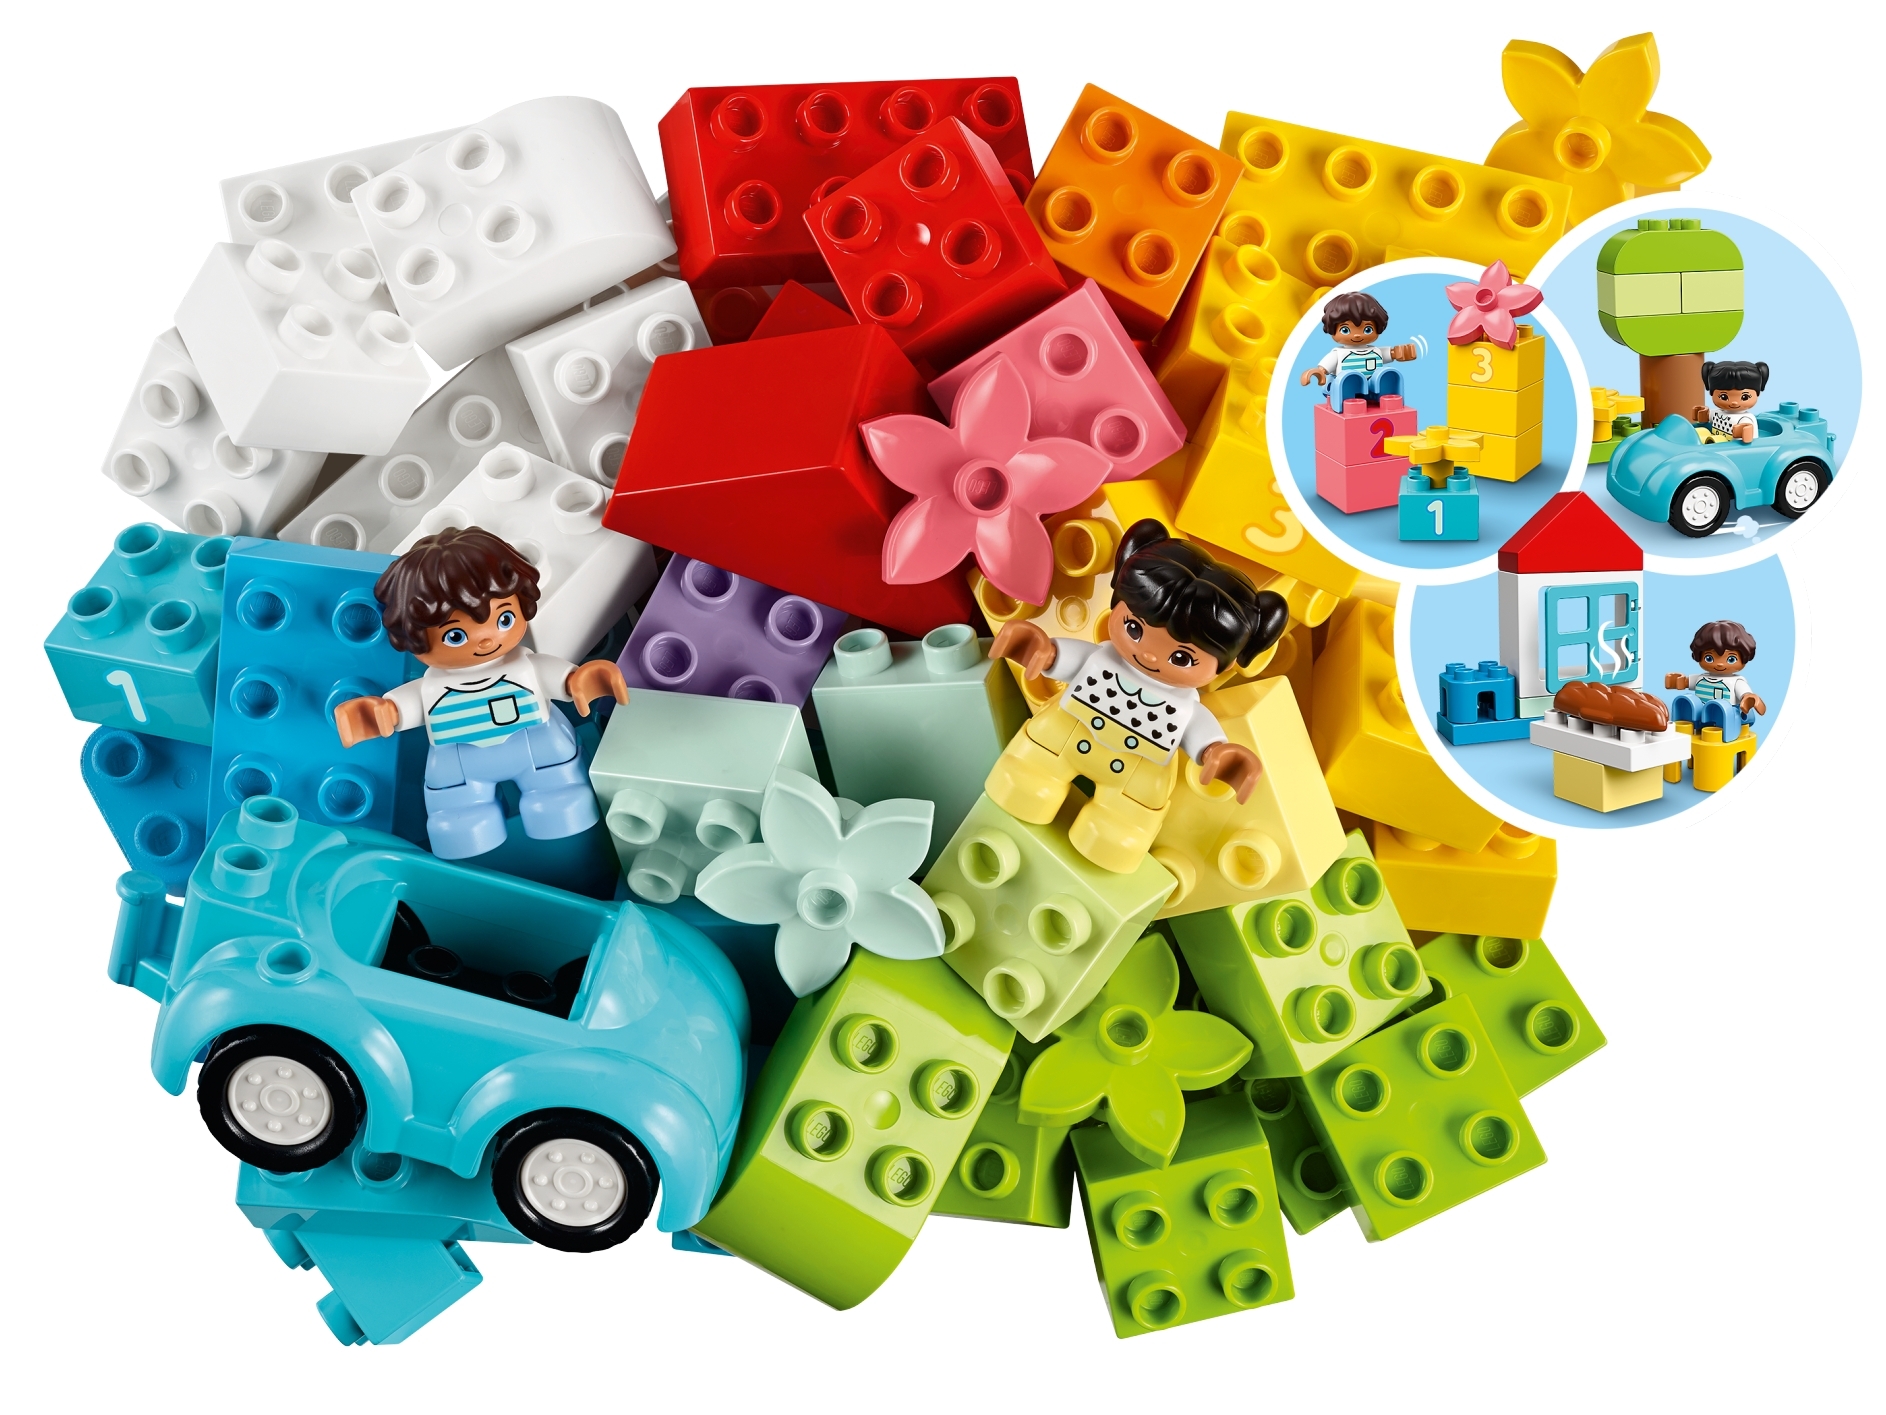 Brick Box 10913 | DUPLO® Buy online at the Official LEGO® US